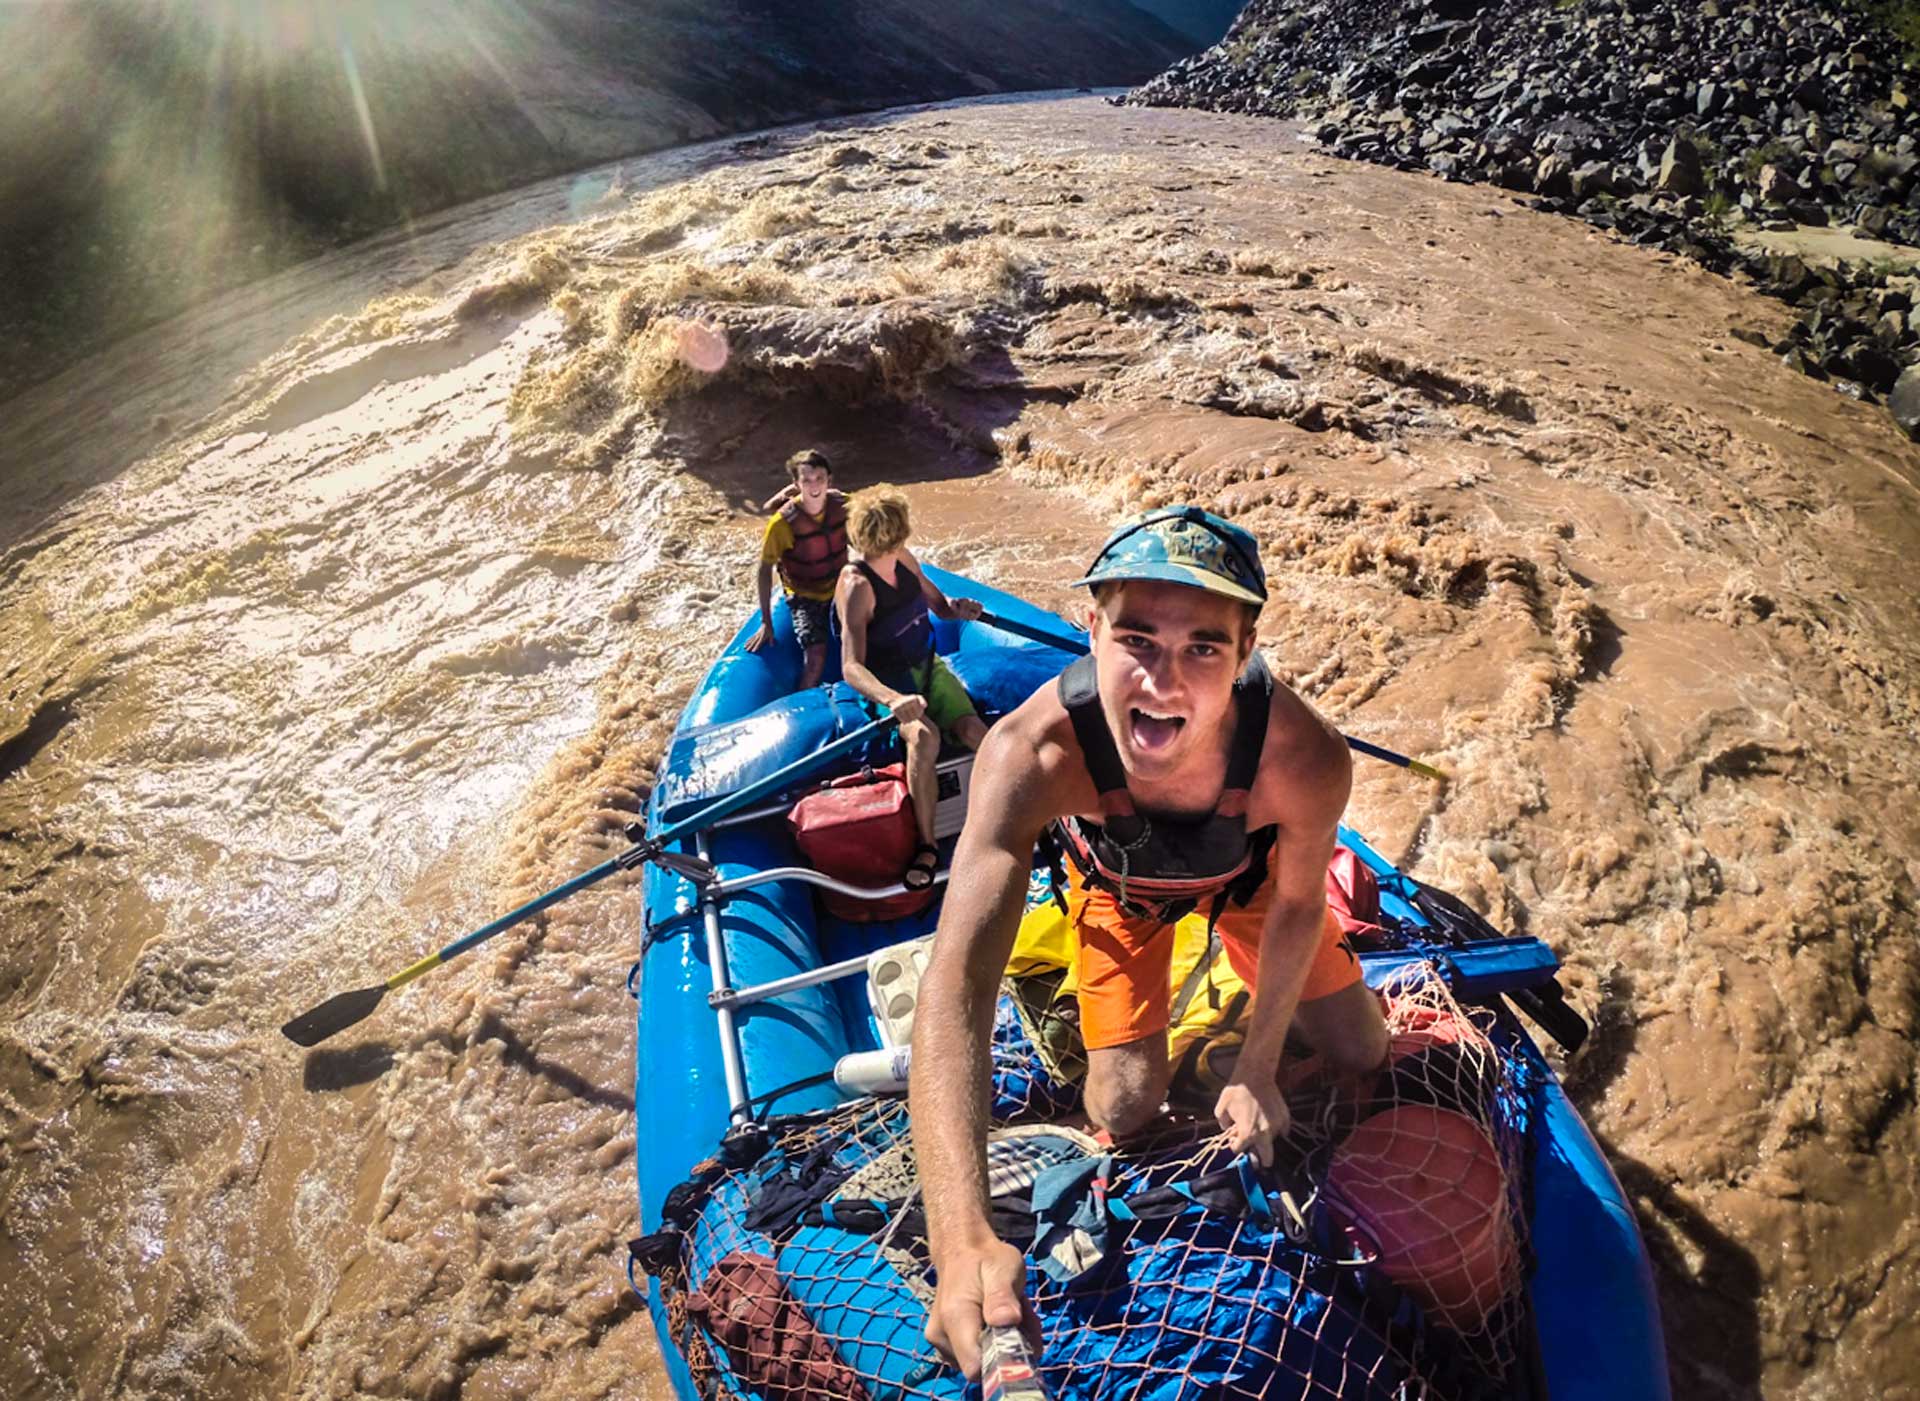 Raft Kayak Rentals Utah. Selfie of group while rafting on the Colorado River during a river gear rental trip in the Grand Canyon in Arizona.